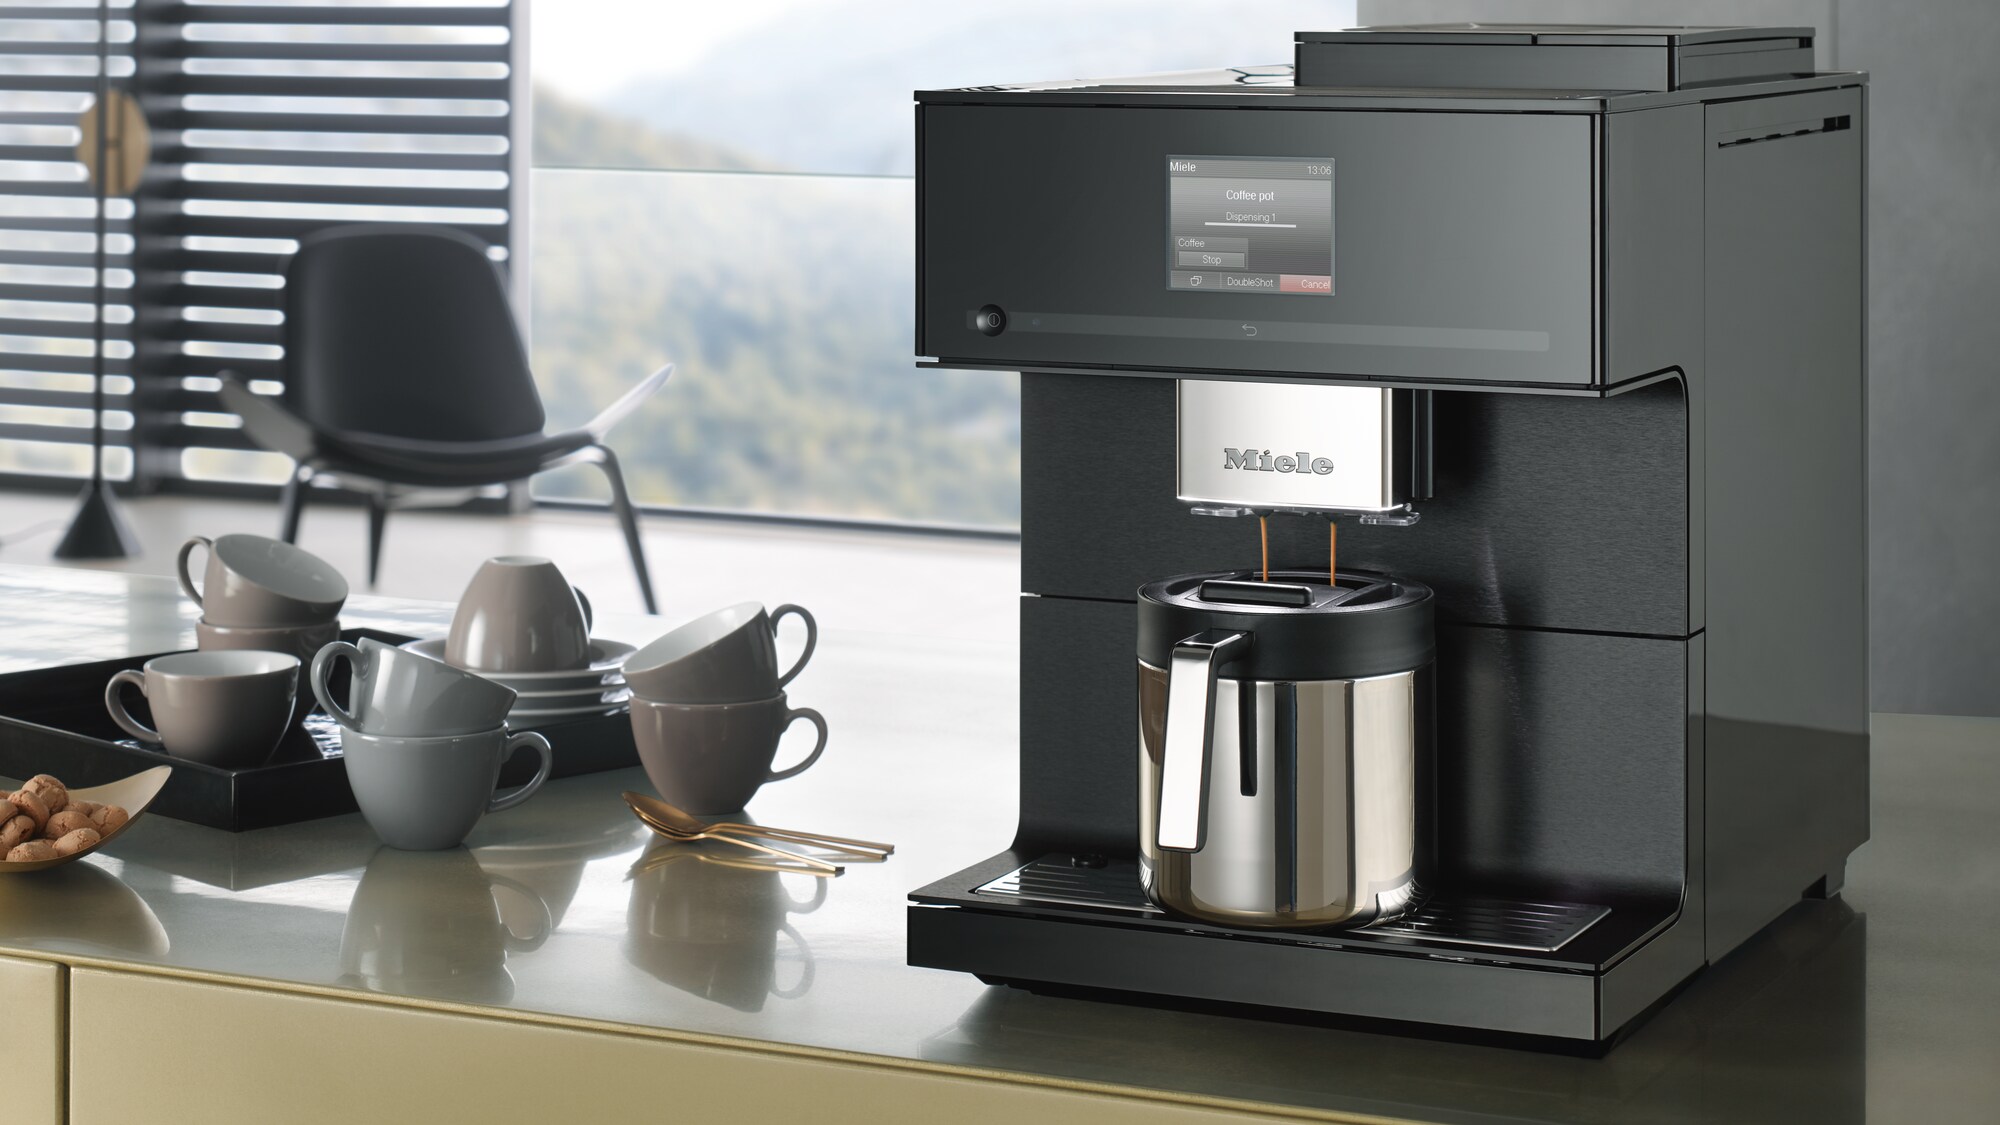 The Best Coffee Machines: What Coffee Machine Should I Use in My Cafe?